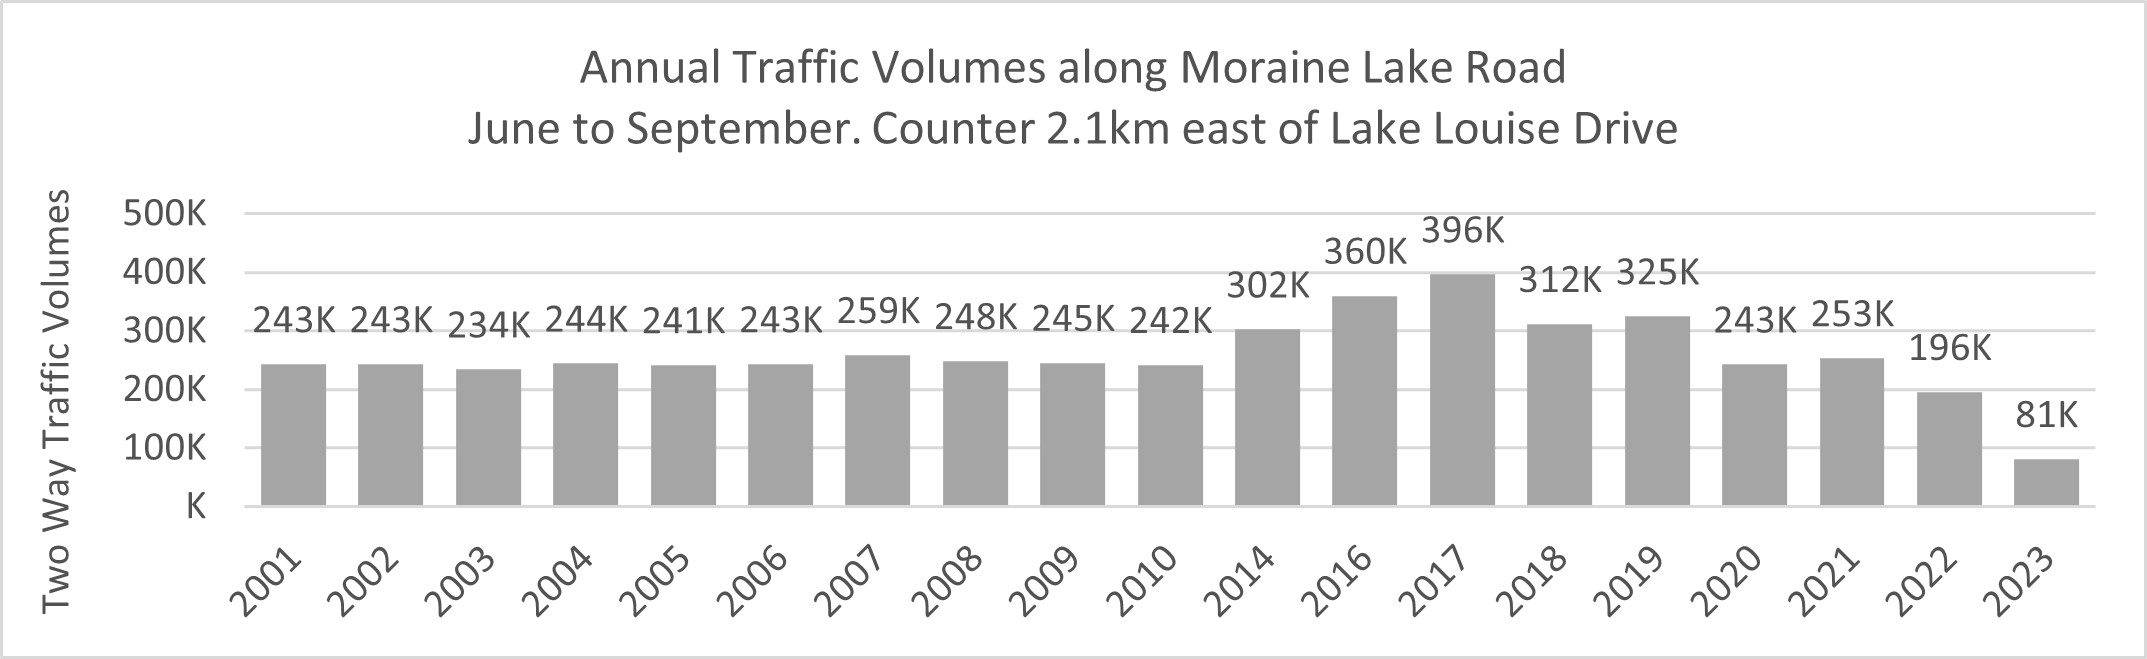 Graphic of Annual Traffic Volumes along Moraine Lake Road, June to September. Counter located 2.1km east of Lake Louise Drive. More details provided in the text version below. 